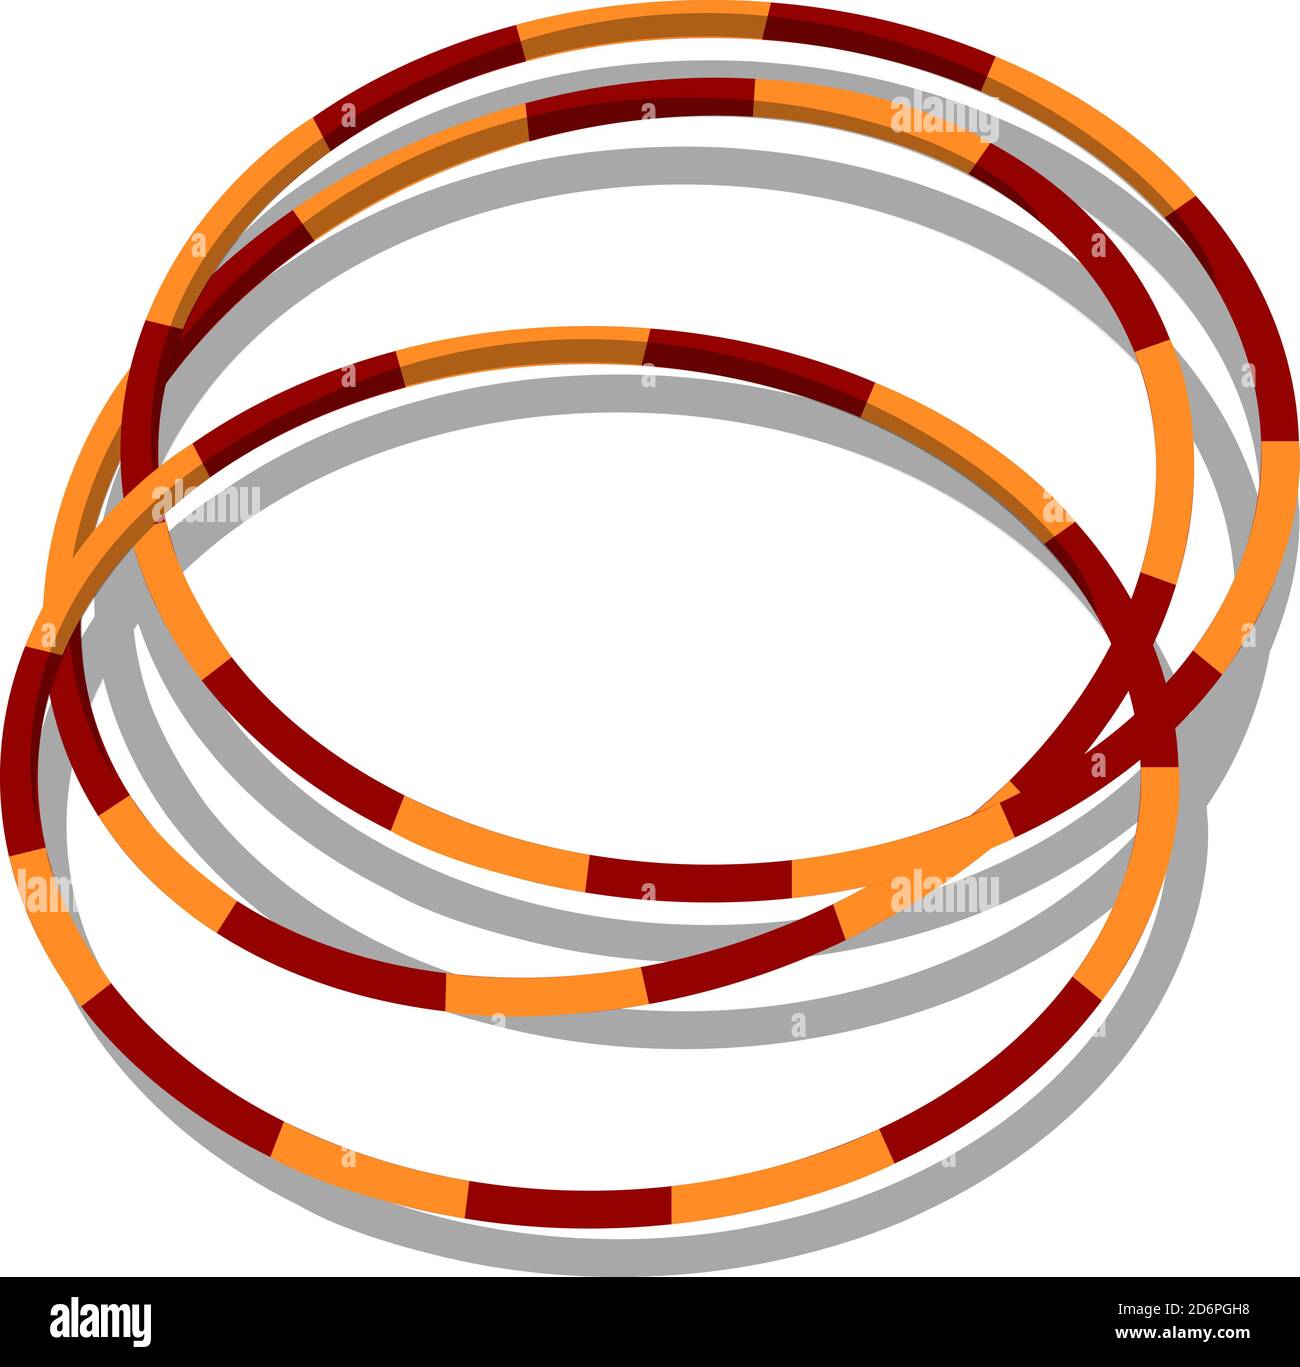 Hula hoops, illustration, vector on white background Stock Vector